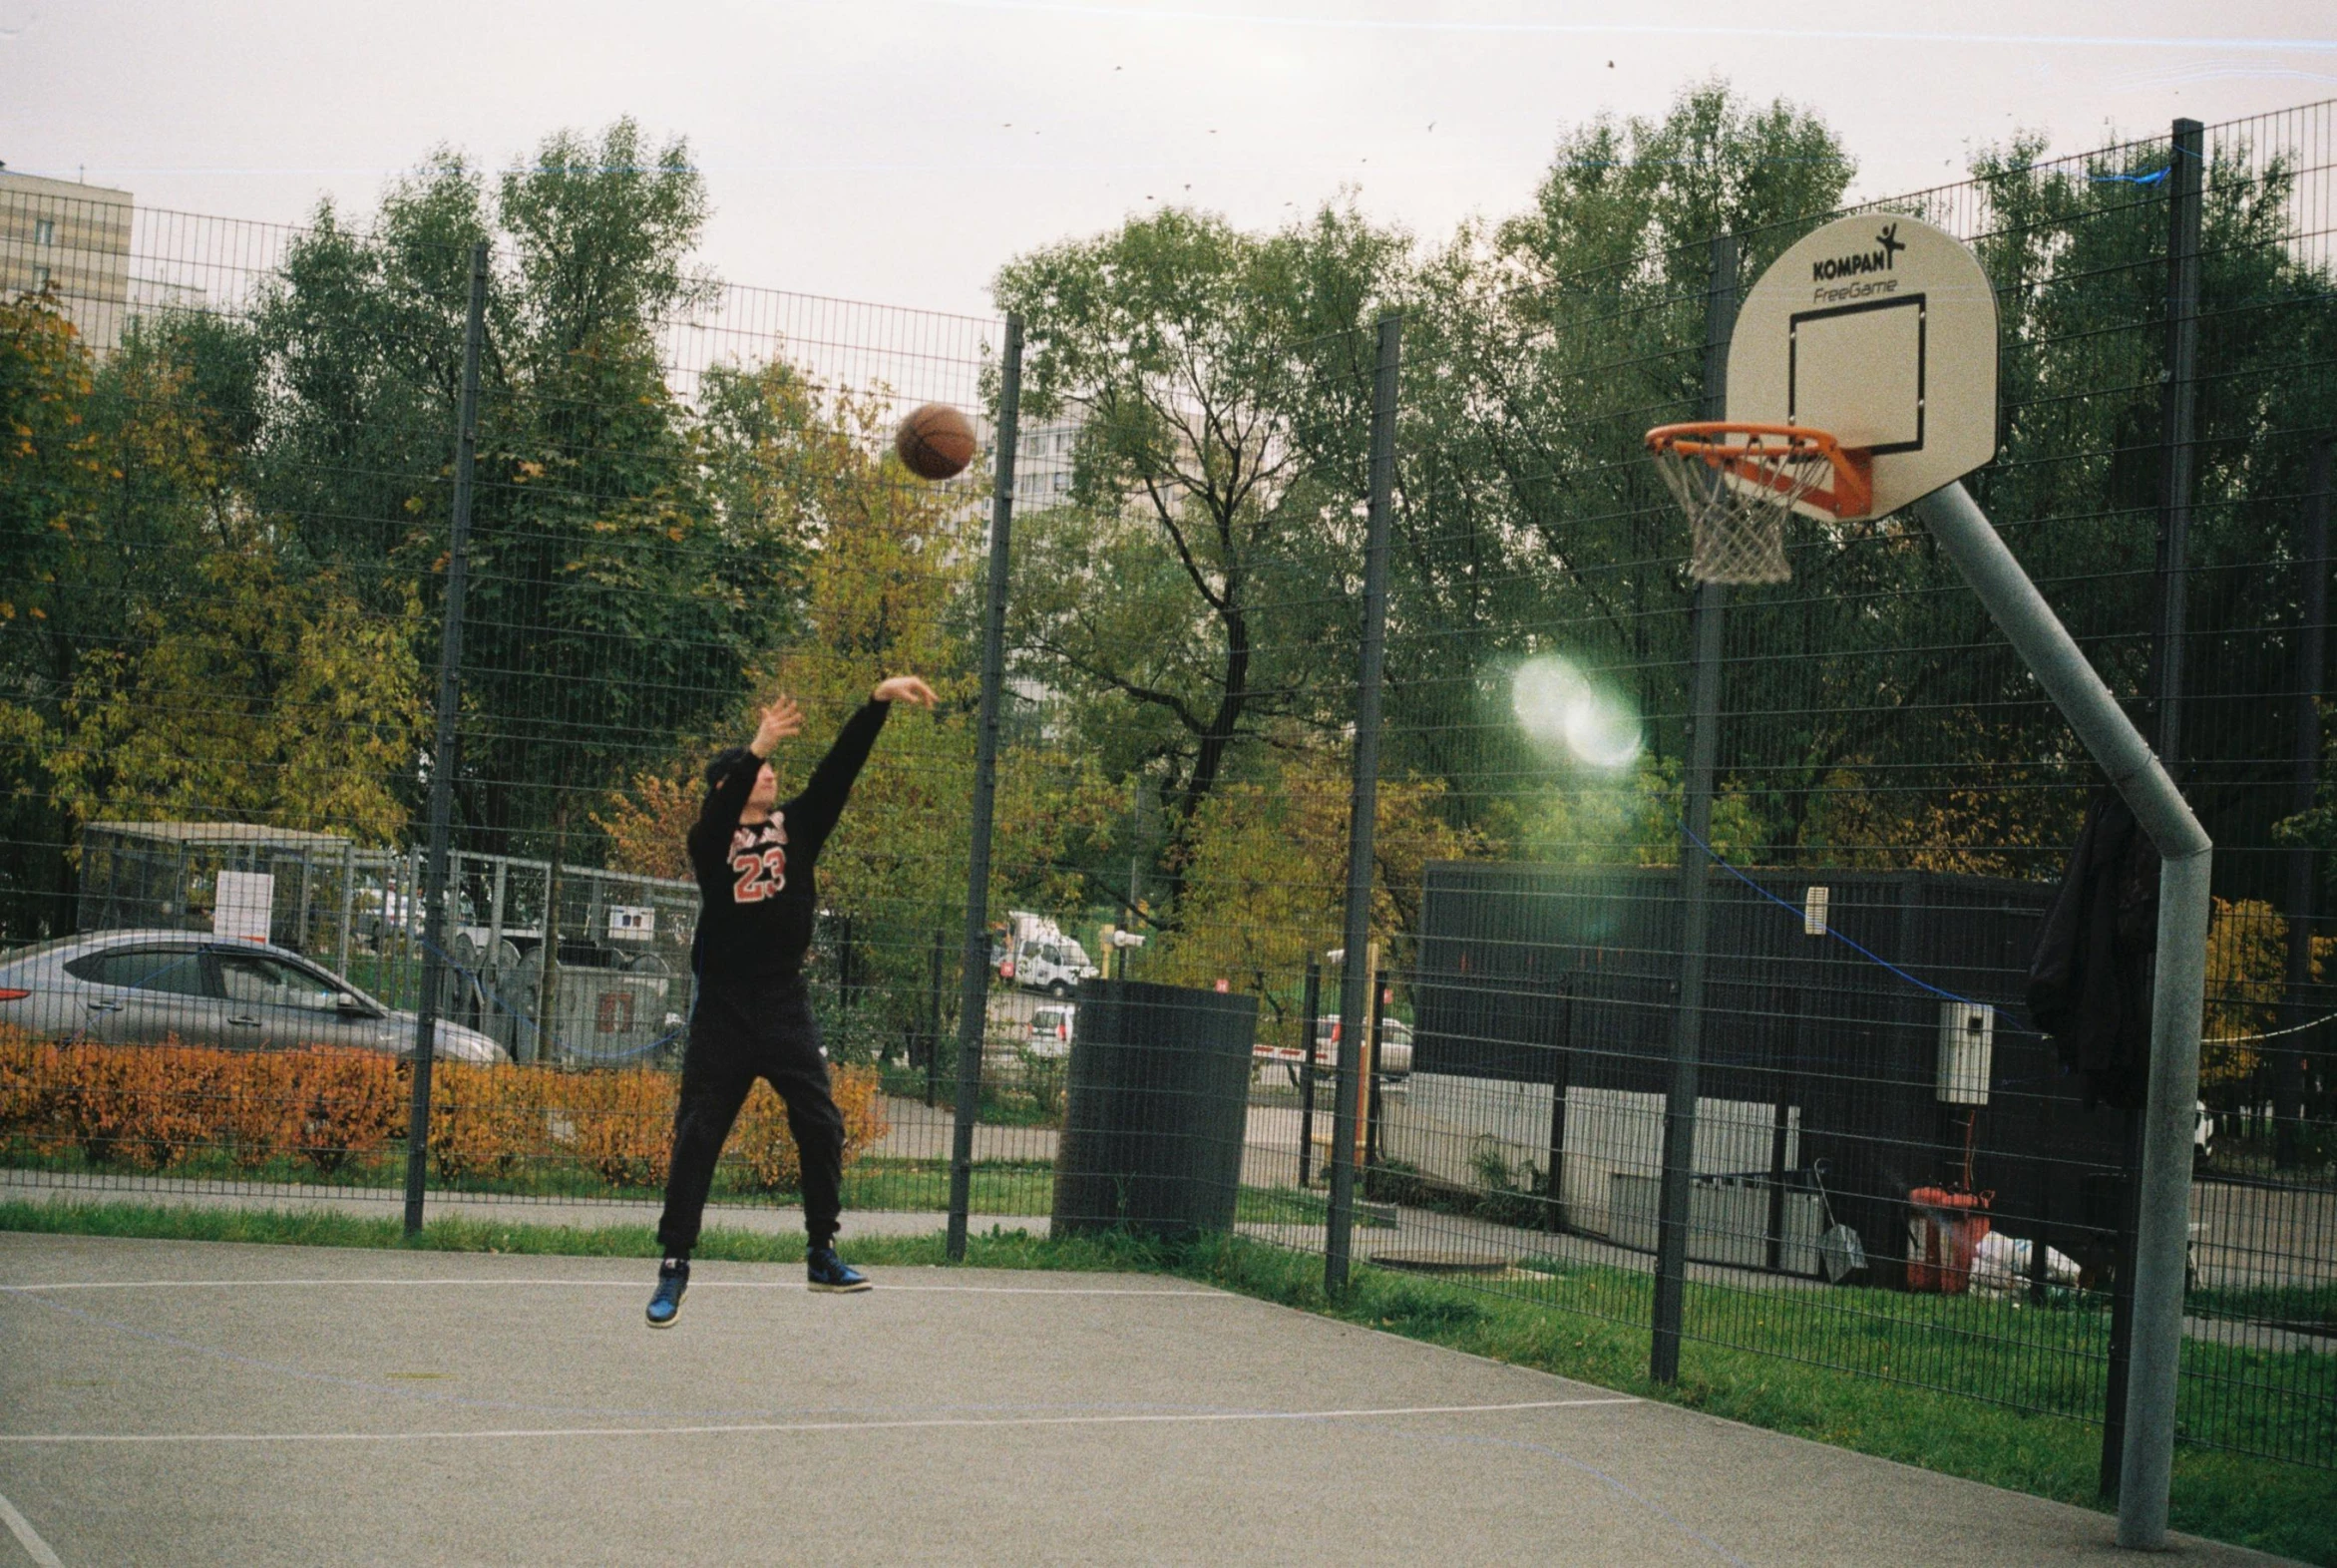 a young man playing with a basketball in the park